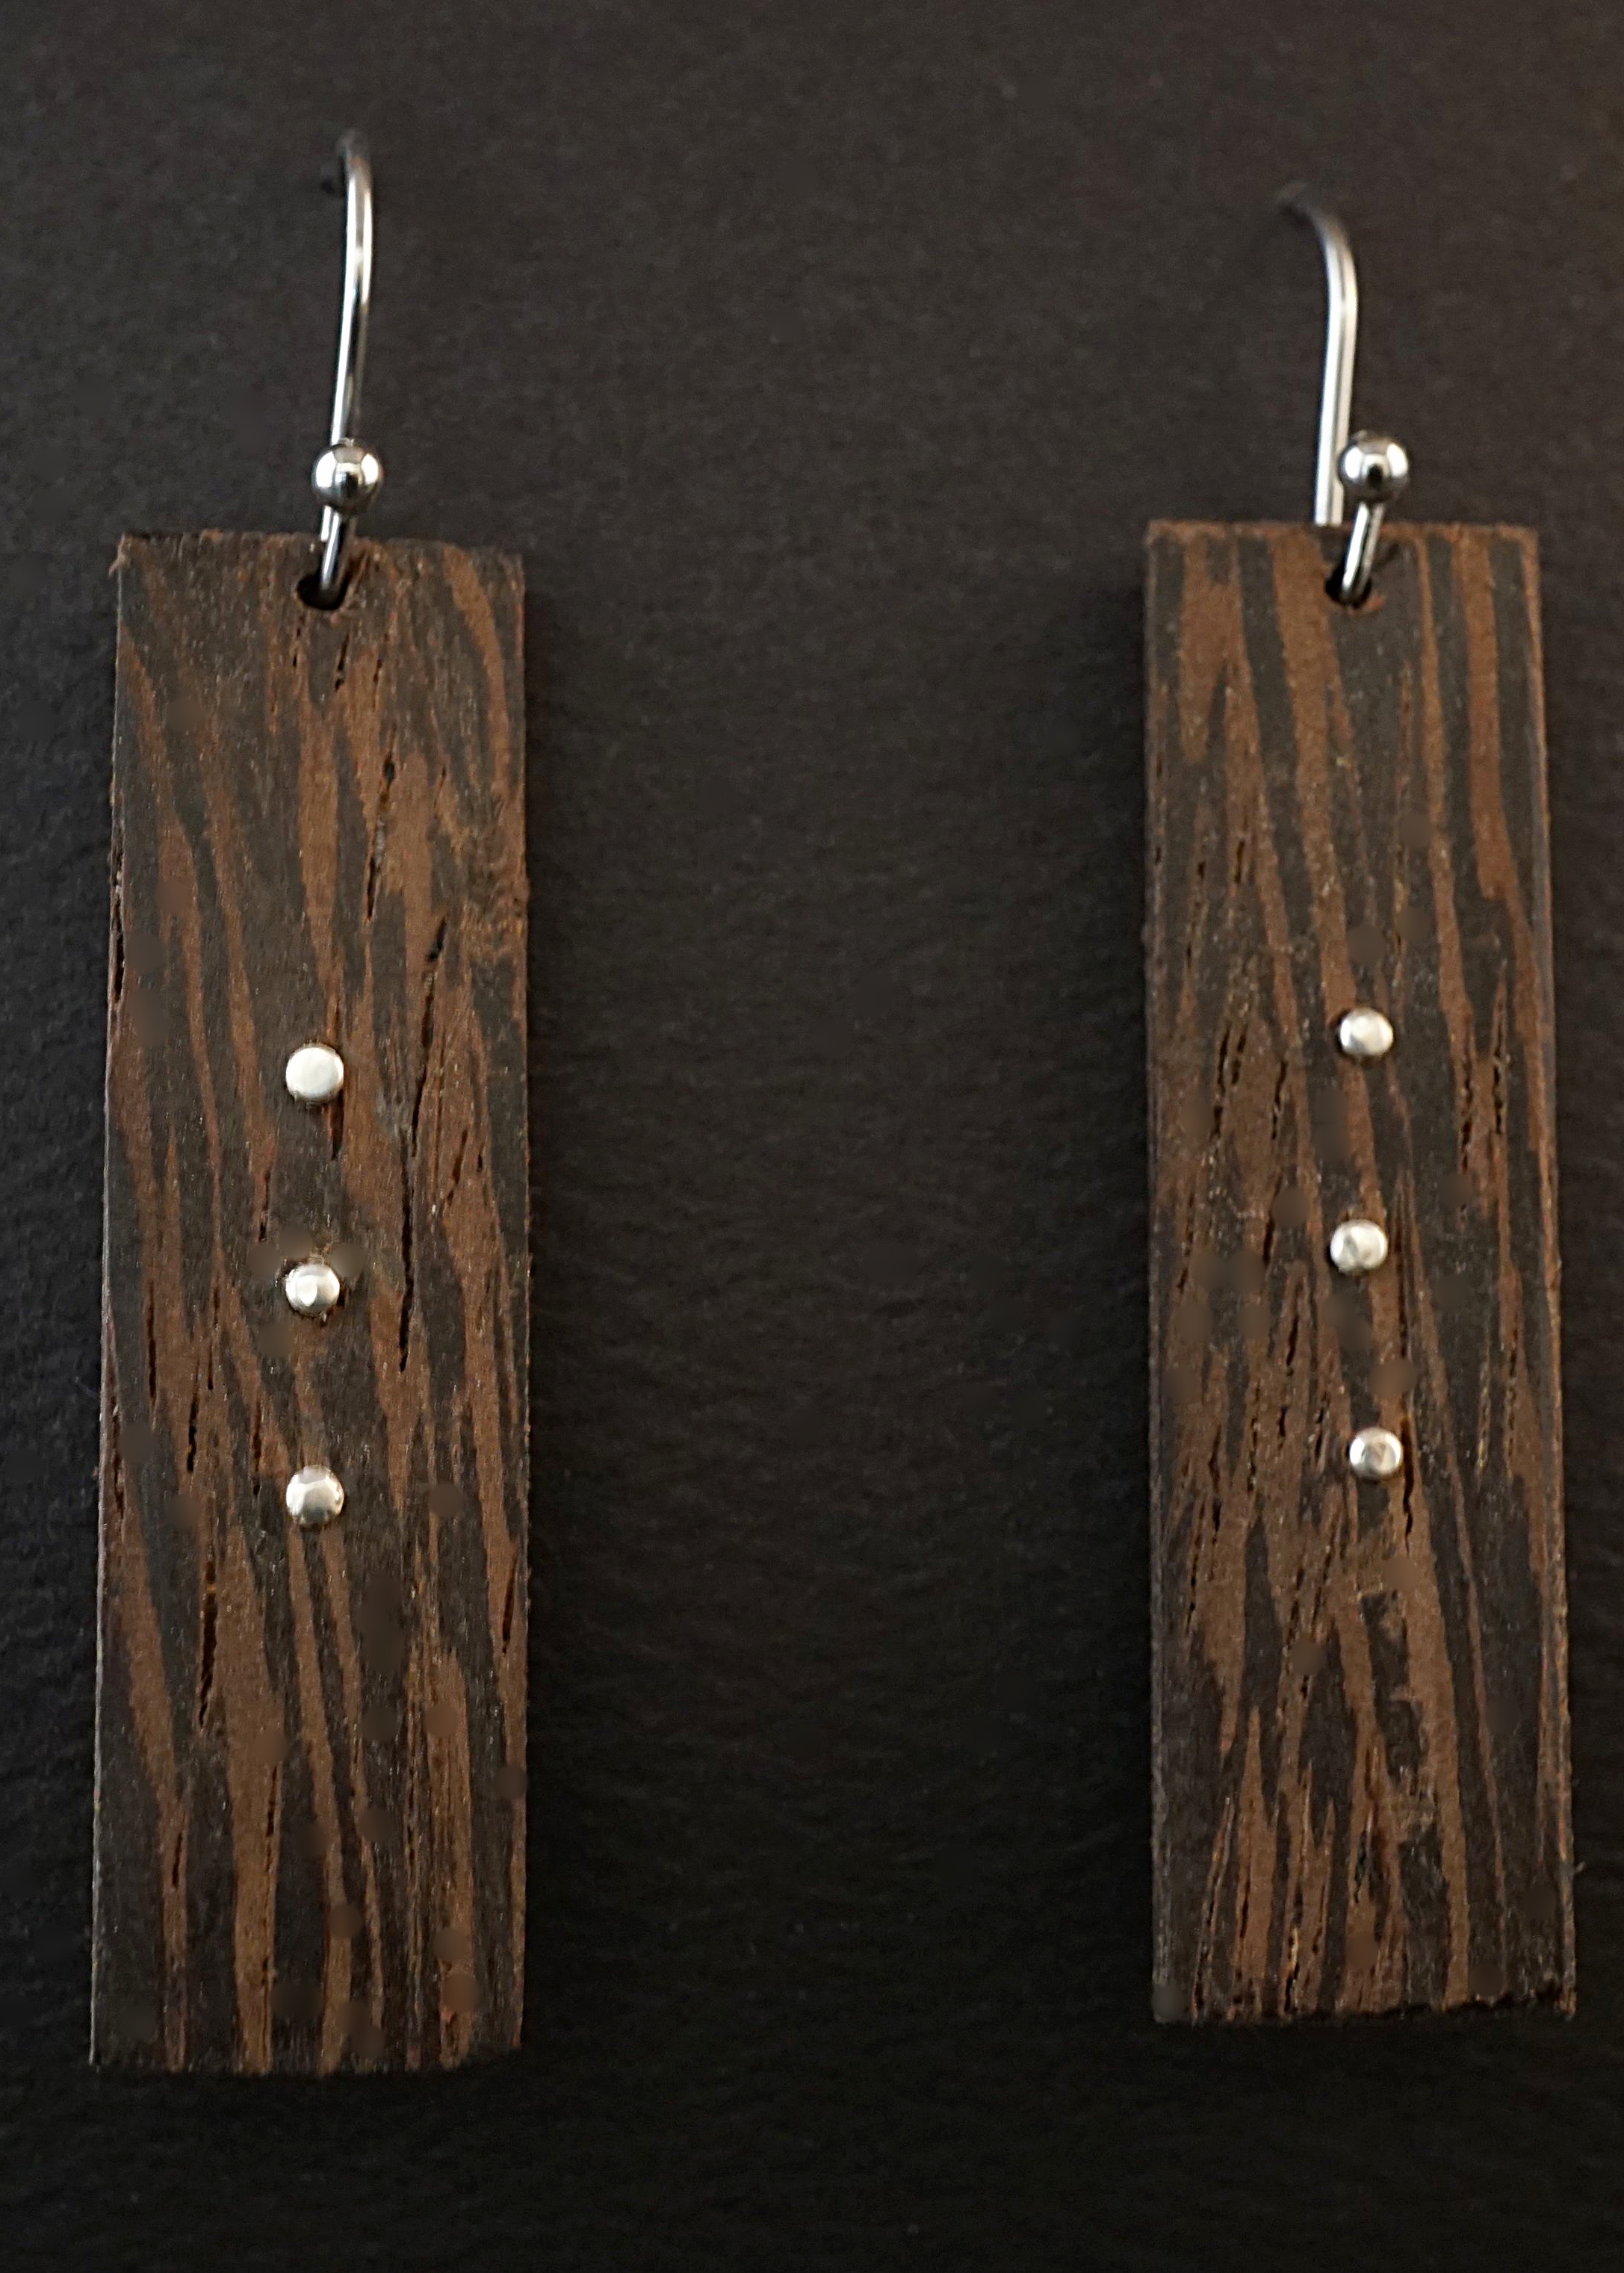 Wenge wood and sterling silver earrings